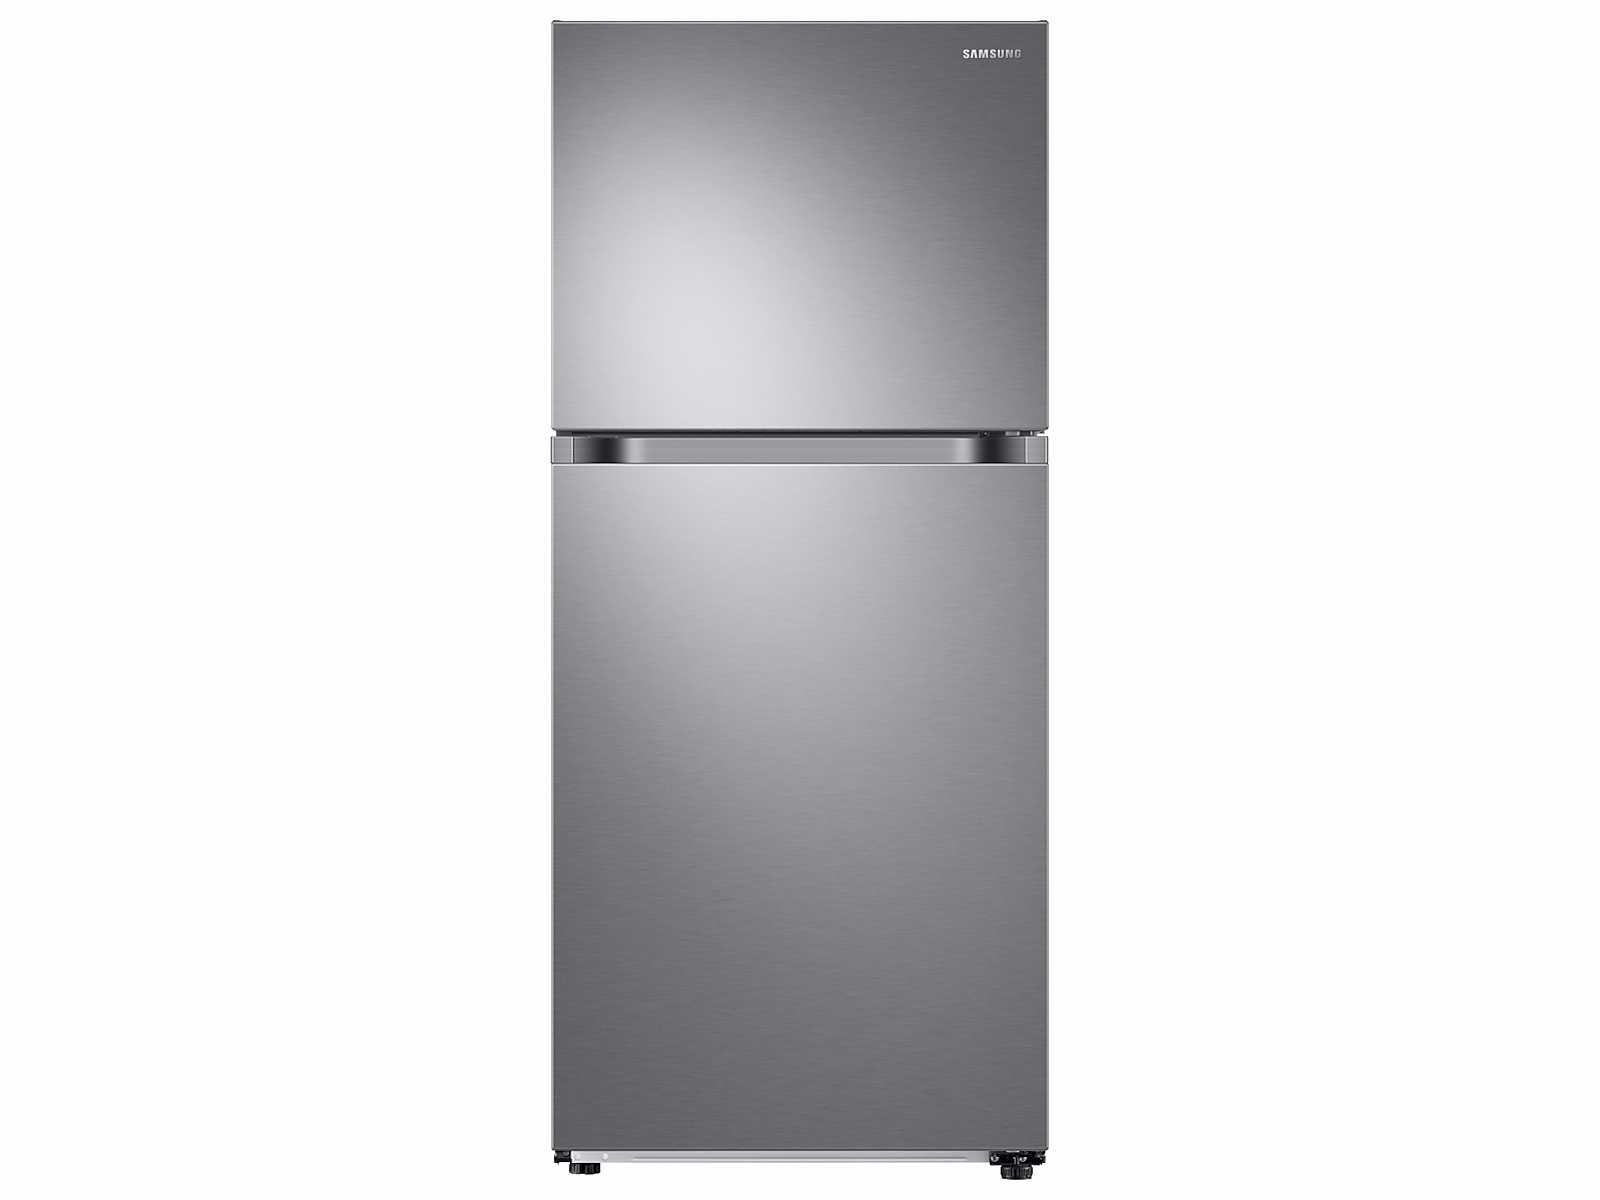 Samsung 18 cu. ft. Top Freezer Refrigerator with FlexZone™ and Ice Maker in Silver(RT18M6215SR/AA) photo